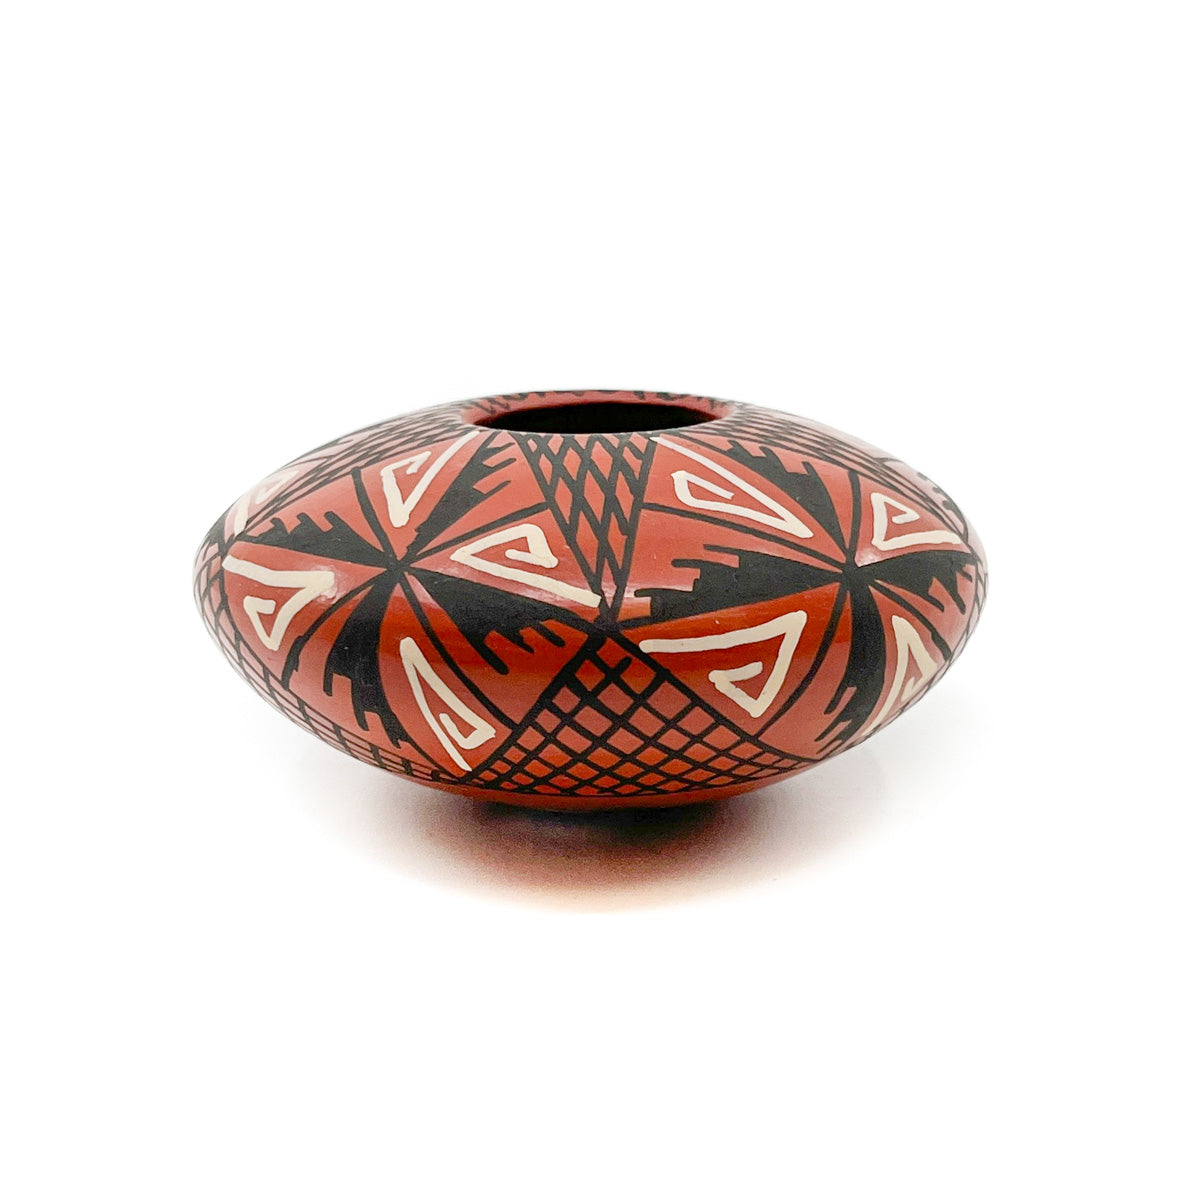 White and Black Geometric Designs on Red Clay